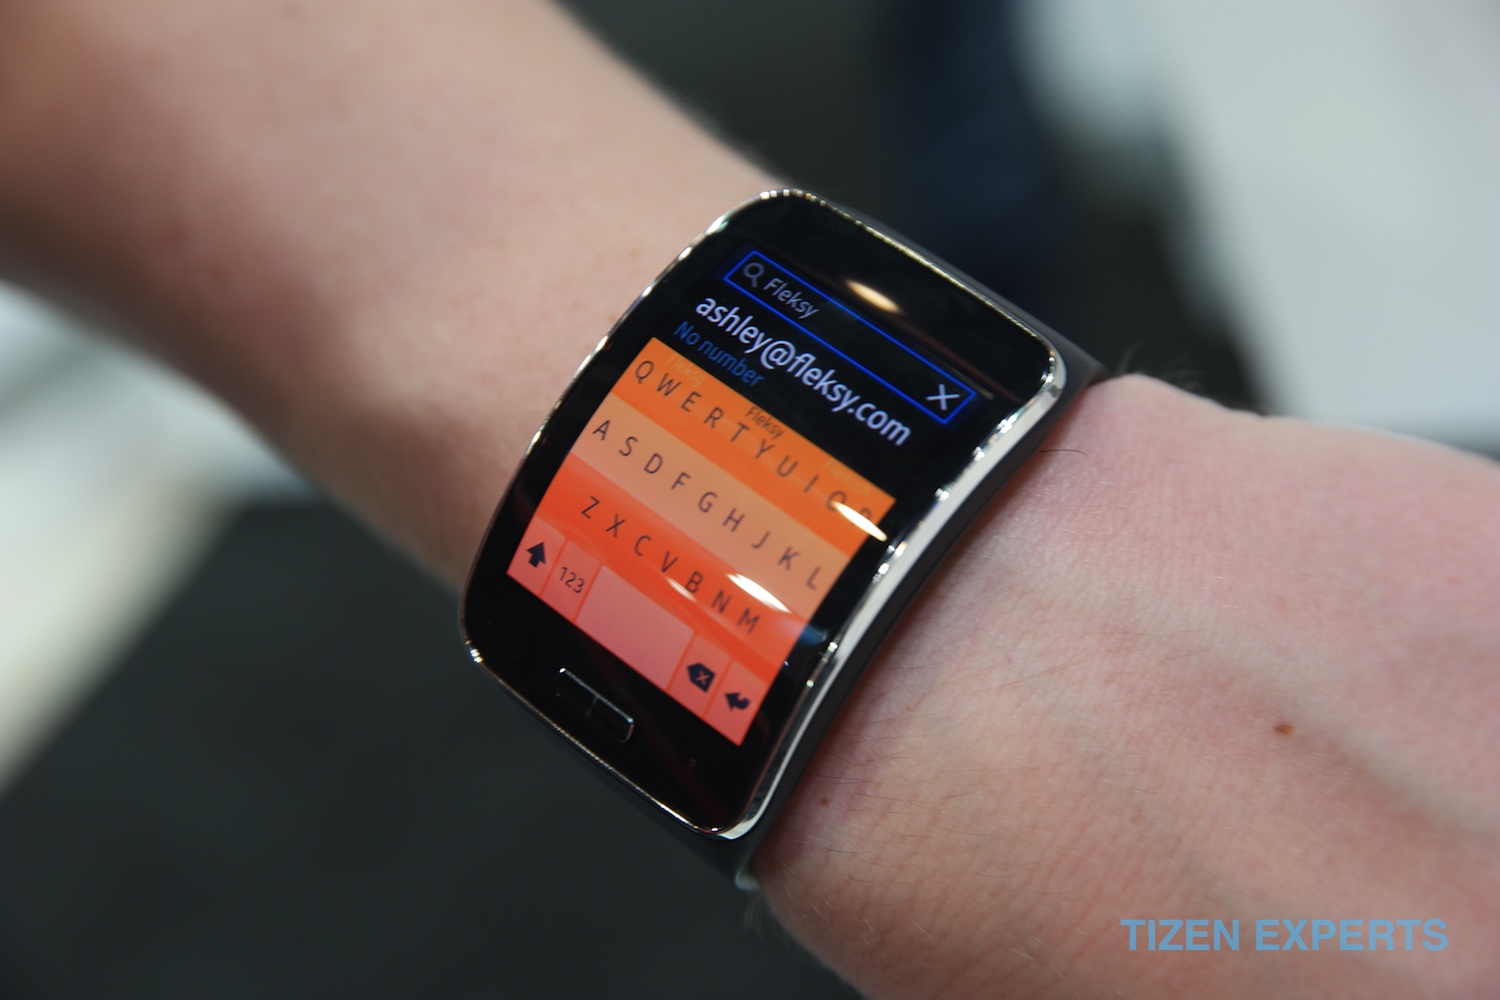 fleksy gear s app download now available